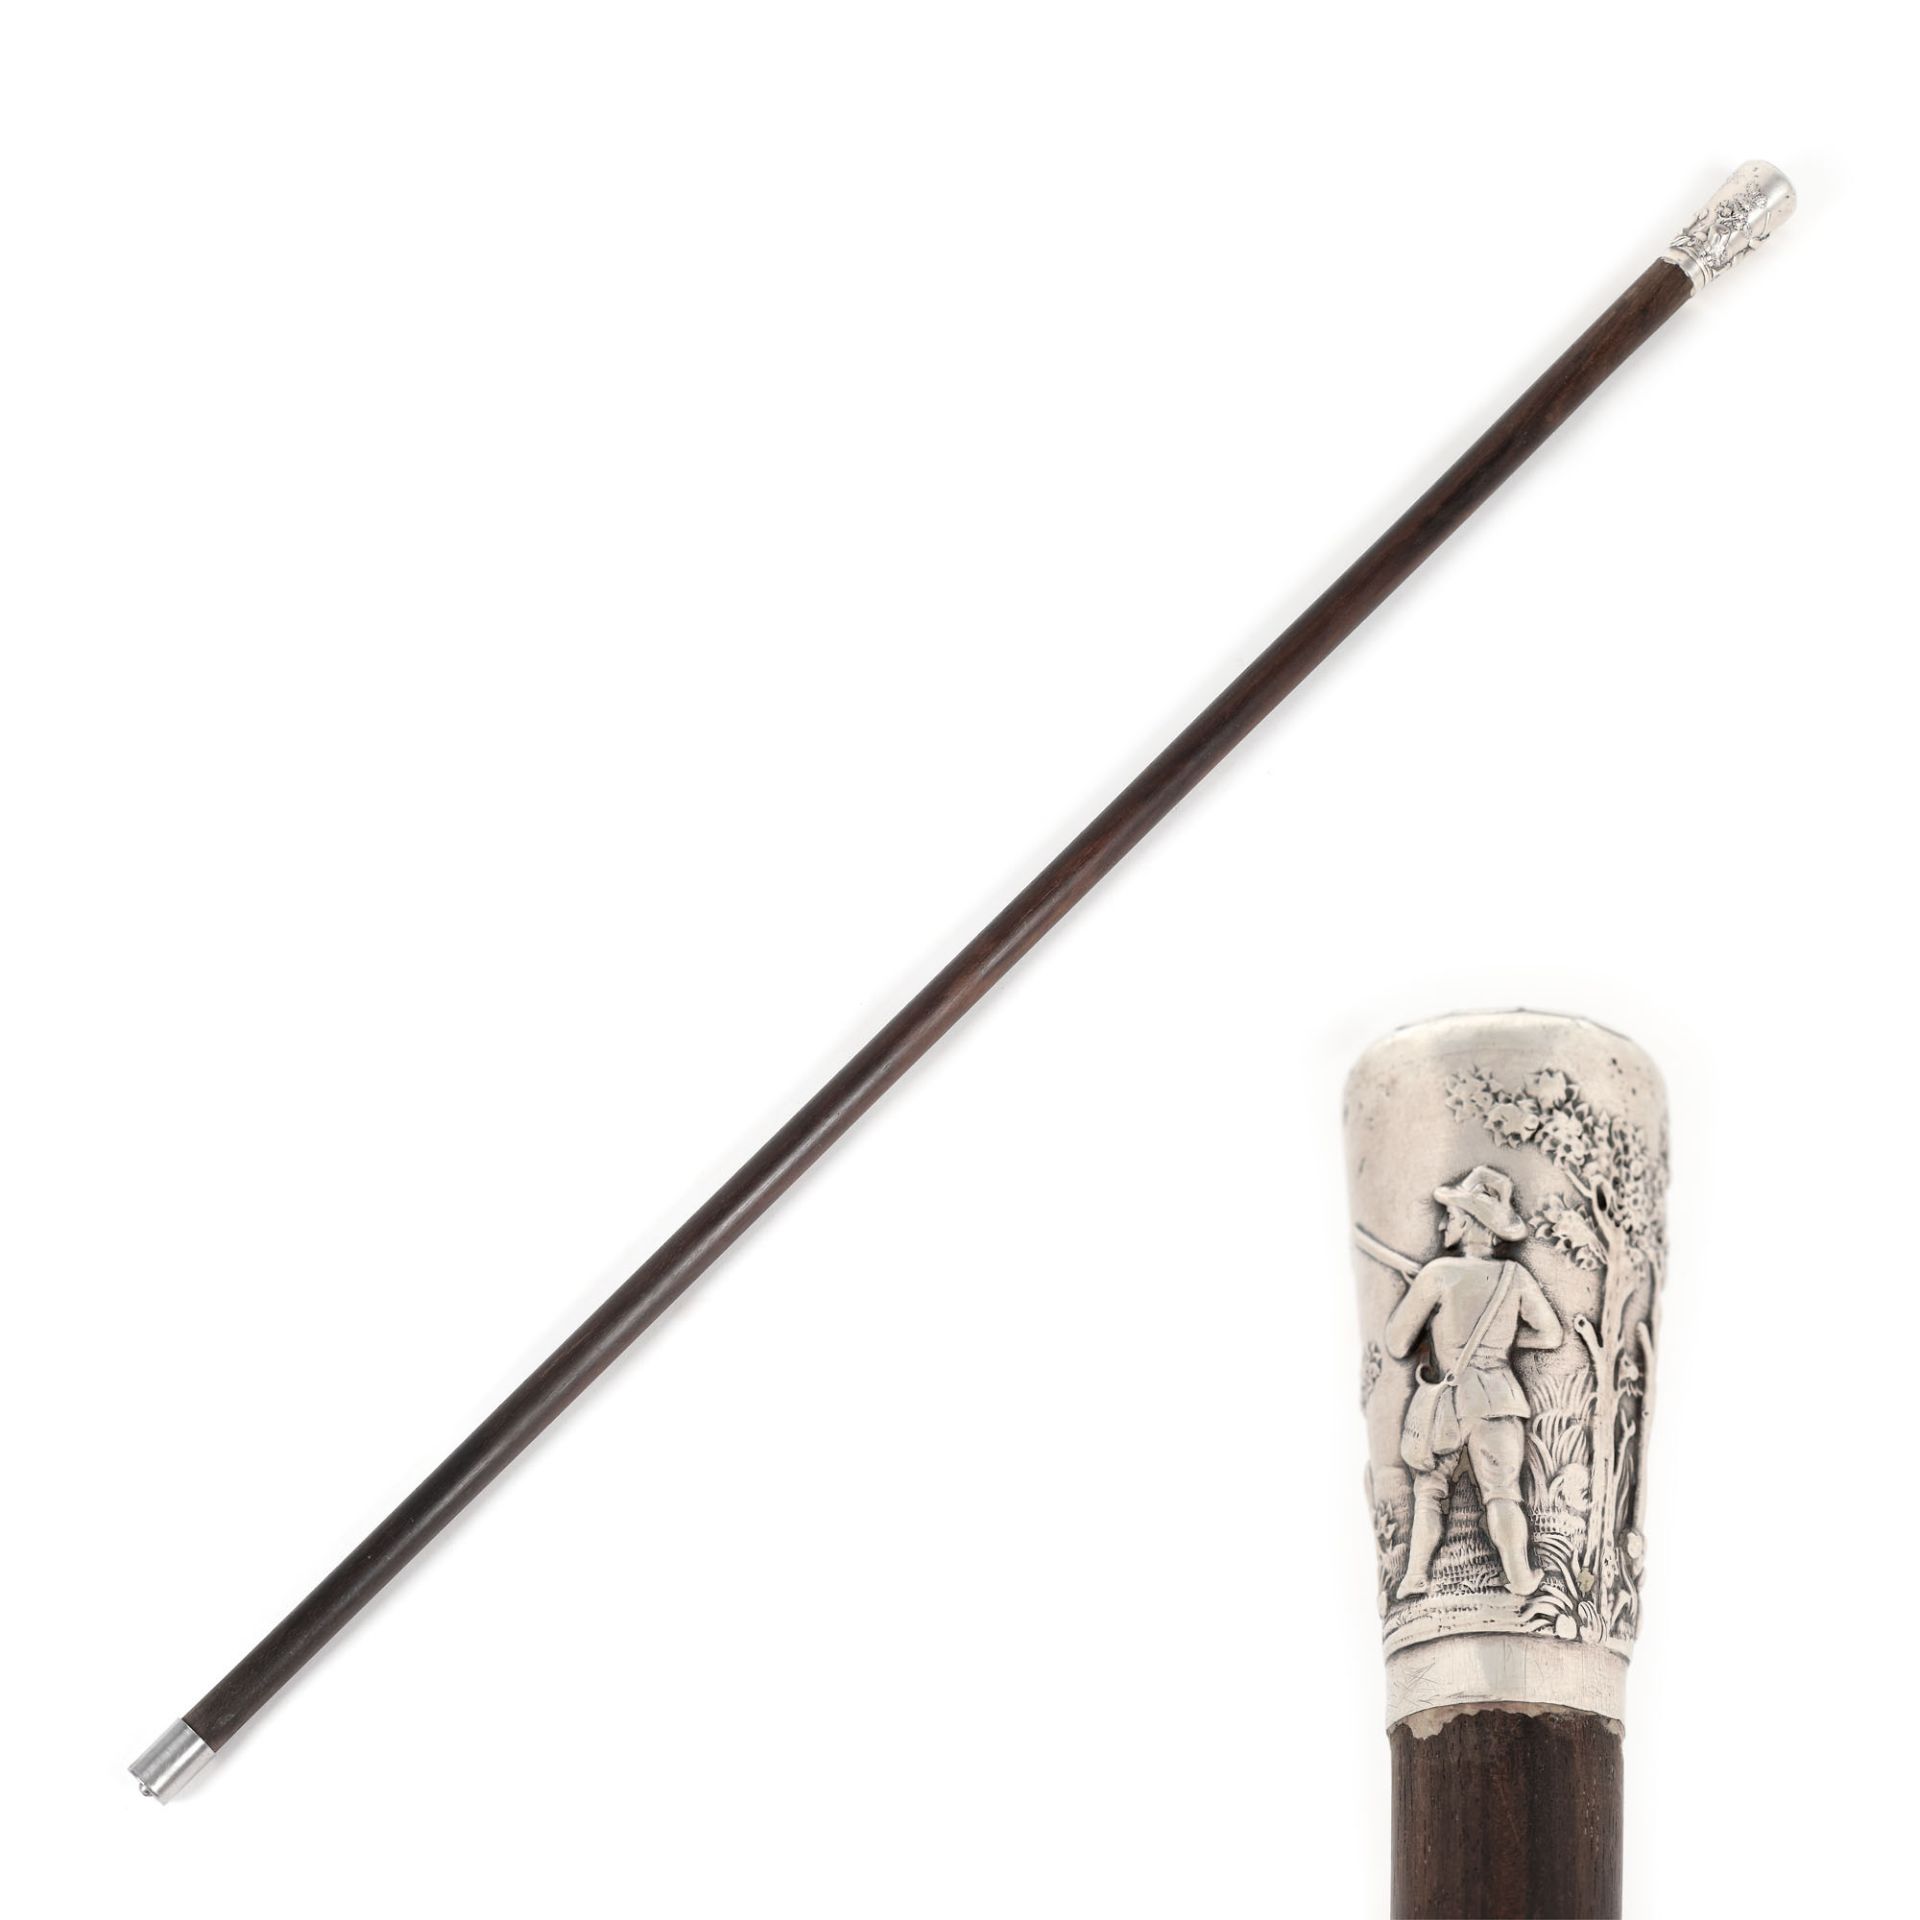 German workshop, Wooden stick, with silver handle, engraved with hunting scene, approx. 1900